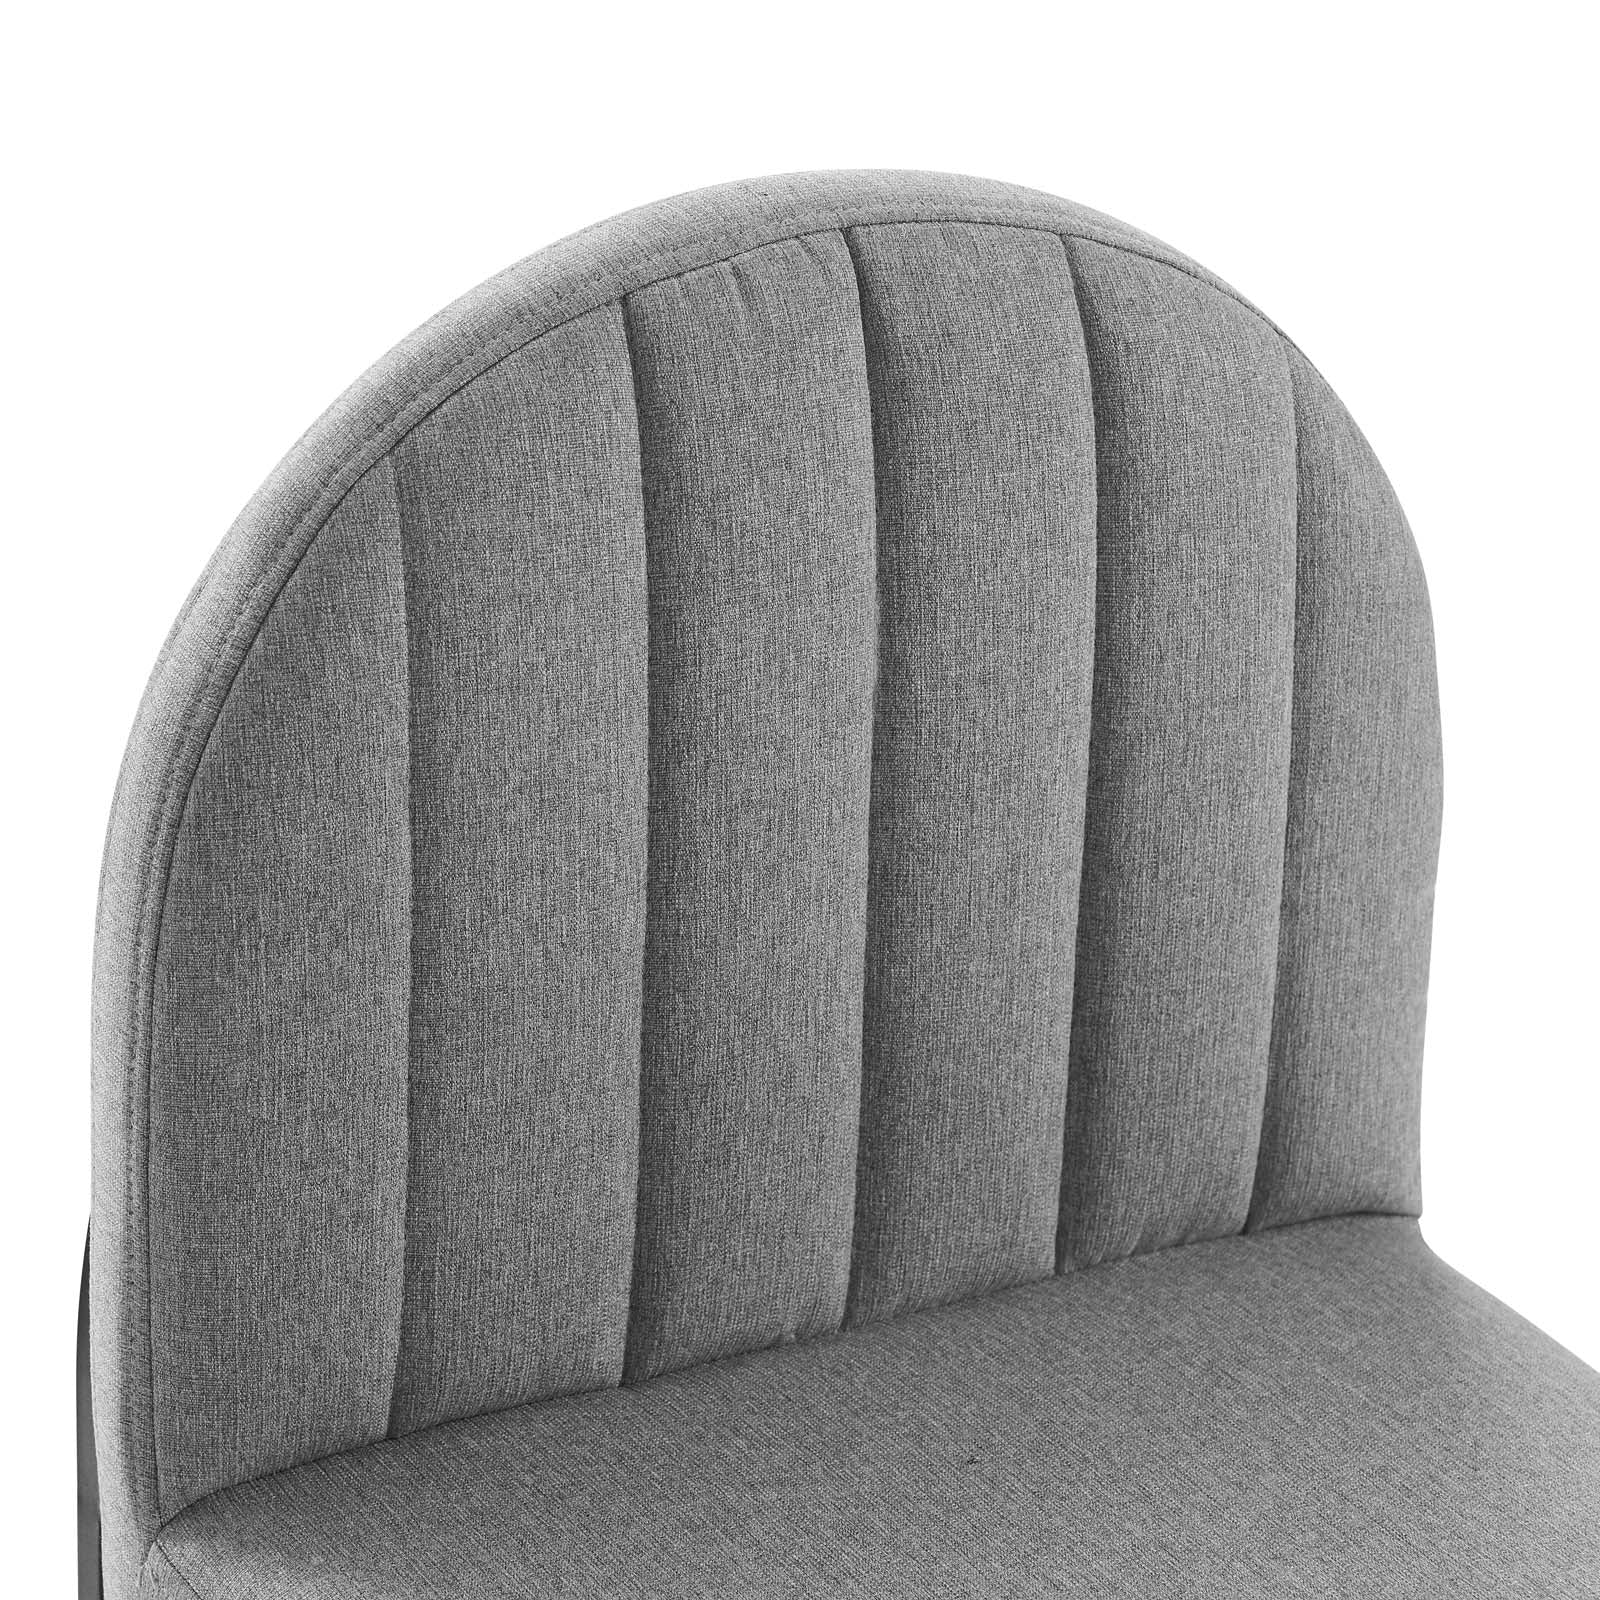 Isla Channel Tufted Upholstered Fabric Dining Side Chair-Dining Chair-Modway-Wall2Wall Furnishings